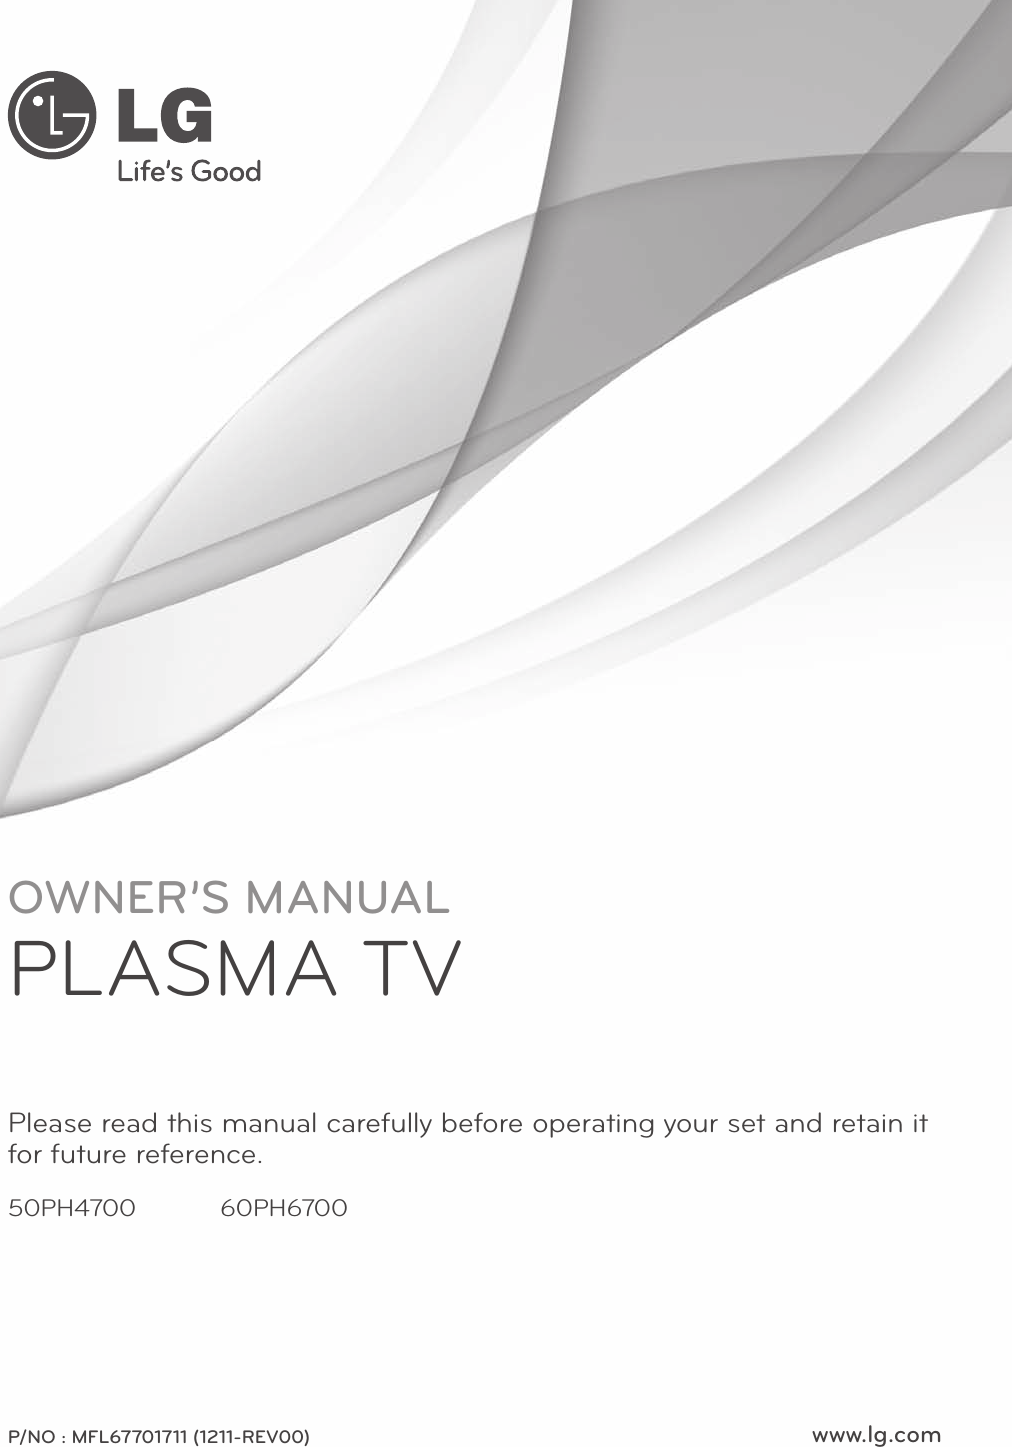 www.lg.comOWNER’S MANUALPLASMA TVPlease read this manual carefully before operating your set and retain it for future reference.P/NO : MFL67701711 (1211-REV00)50PH4700 60PH6700